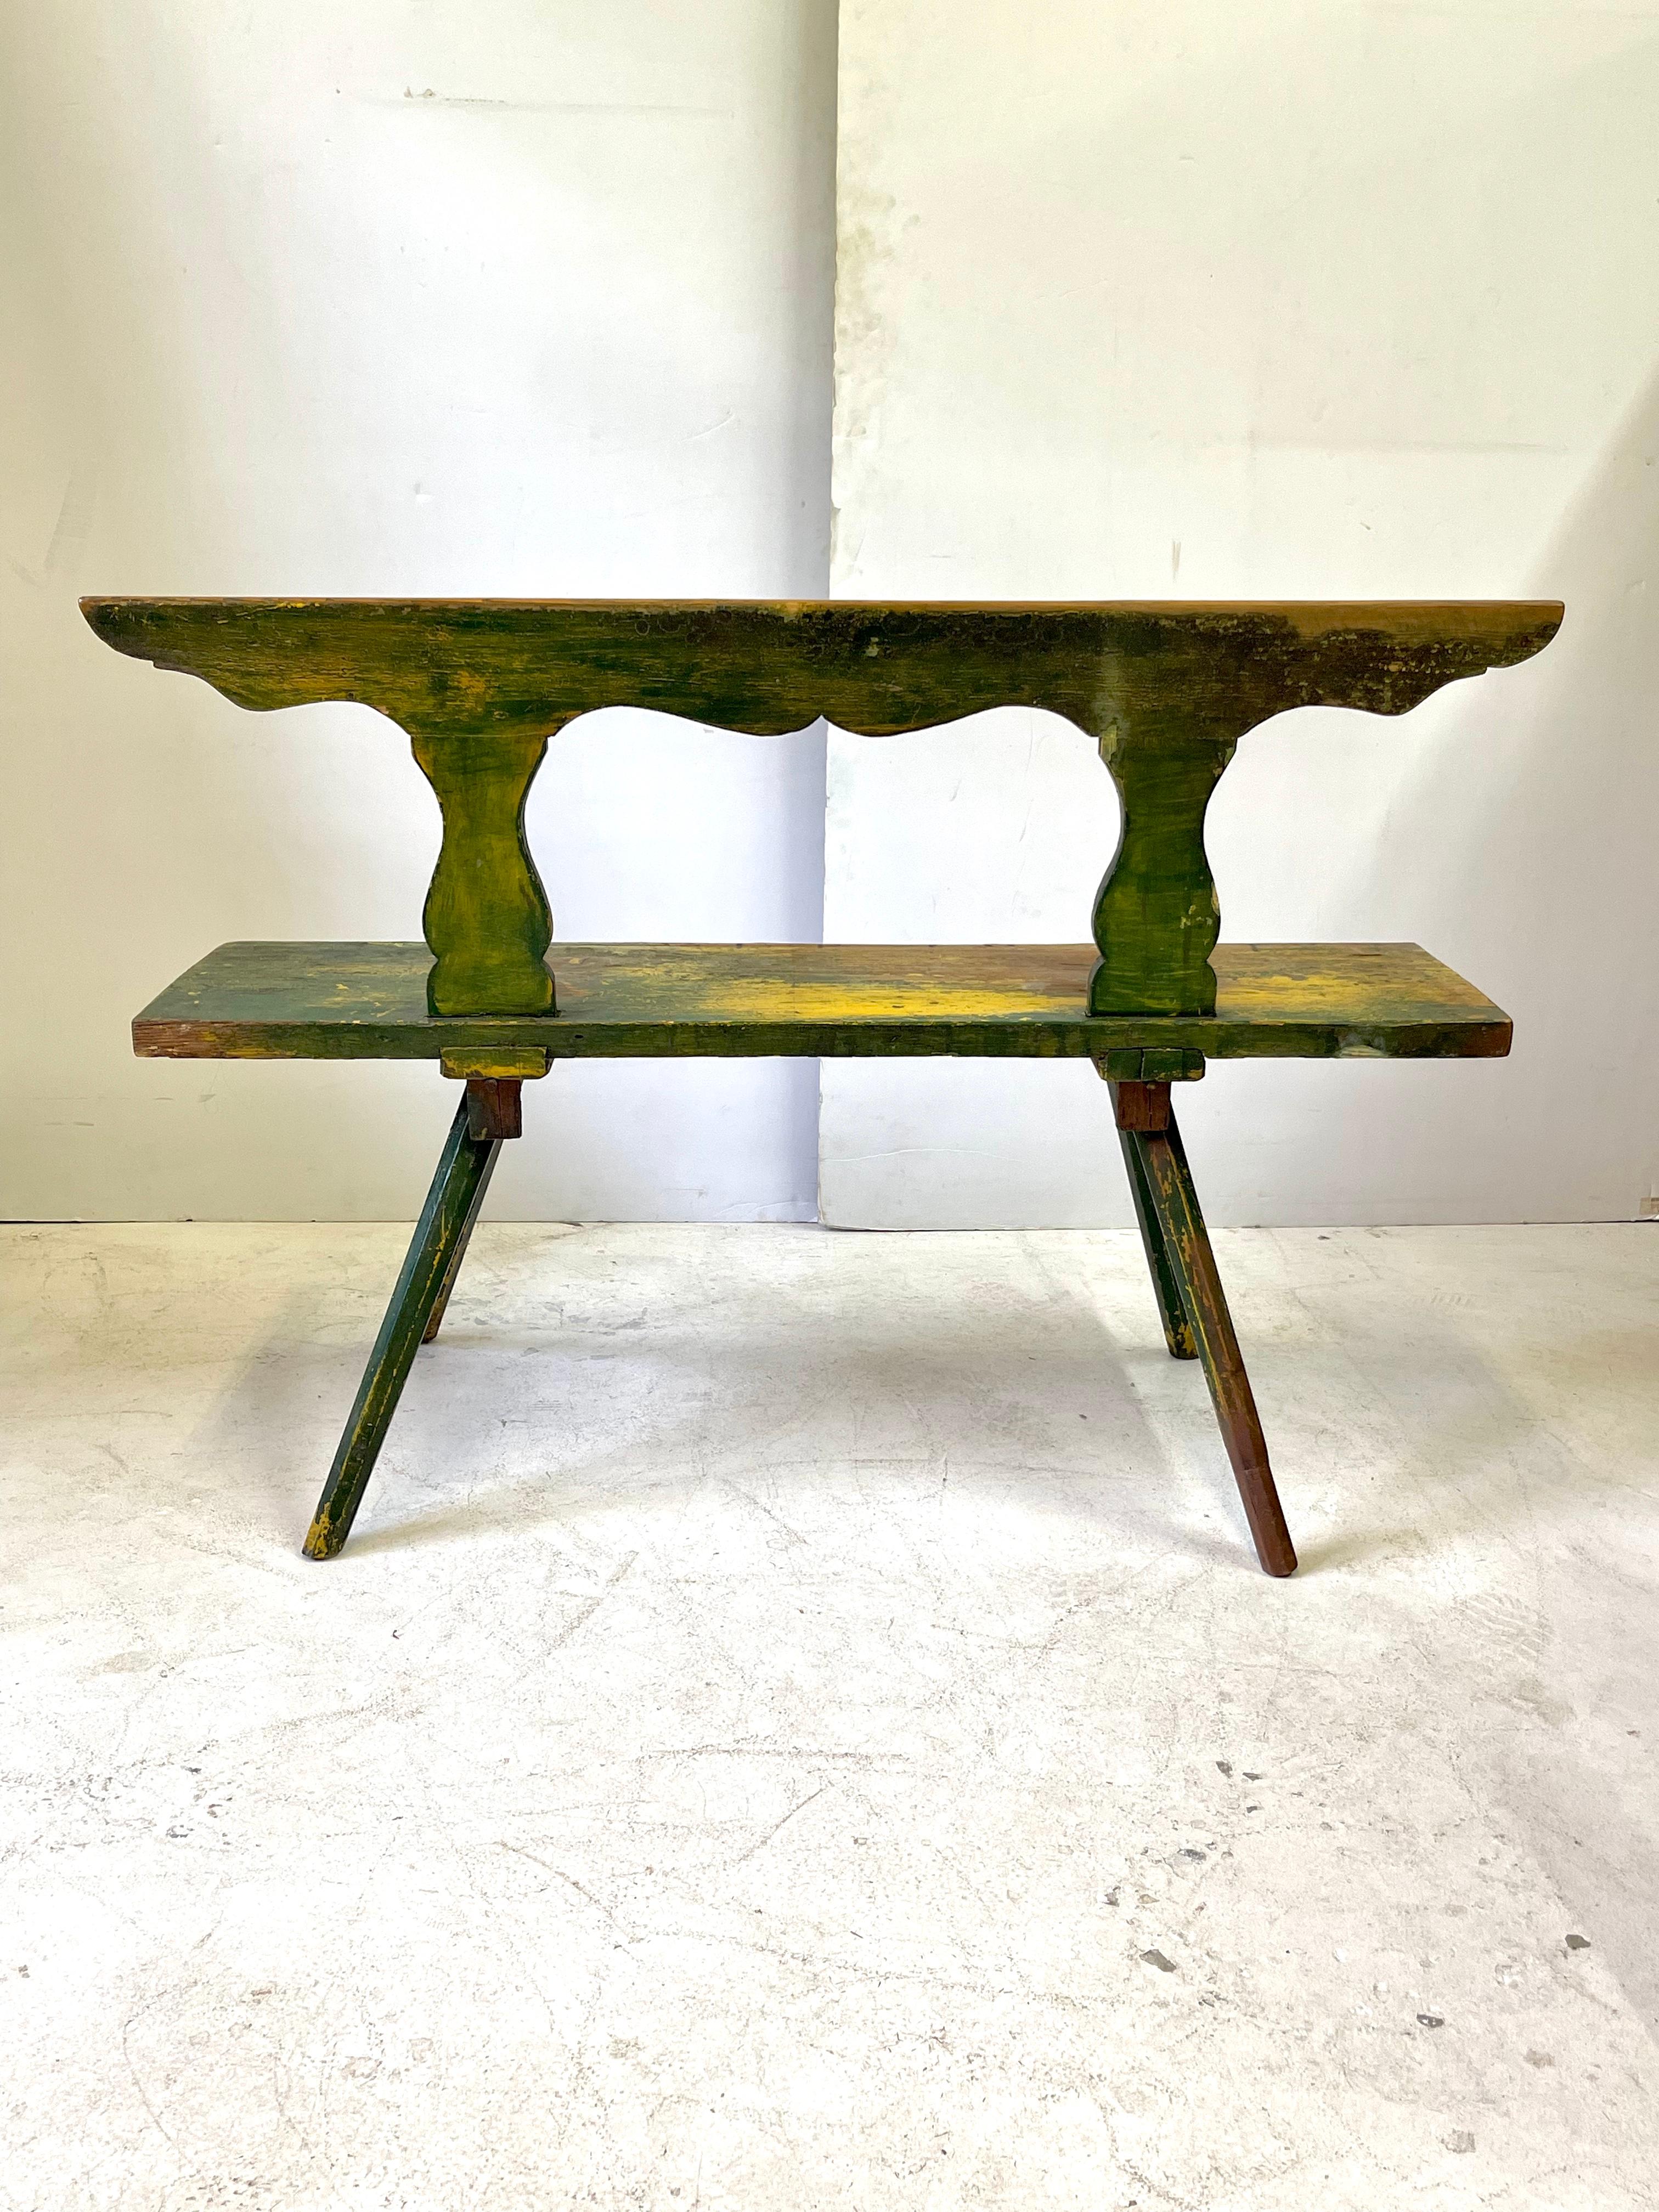 19th Century Rustic Italian Bench in Green and Yellow Paint 2